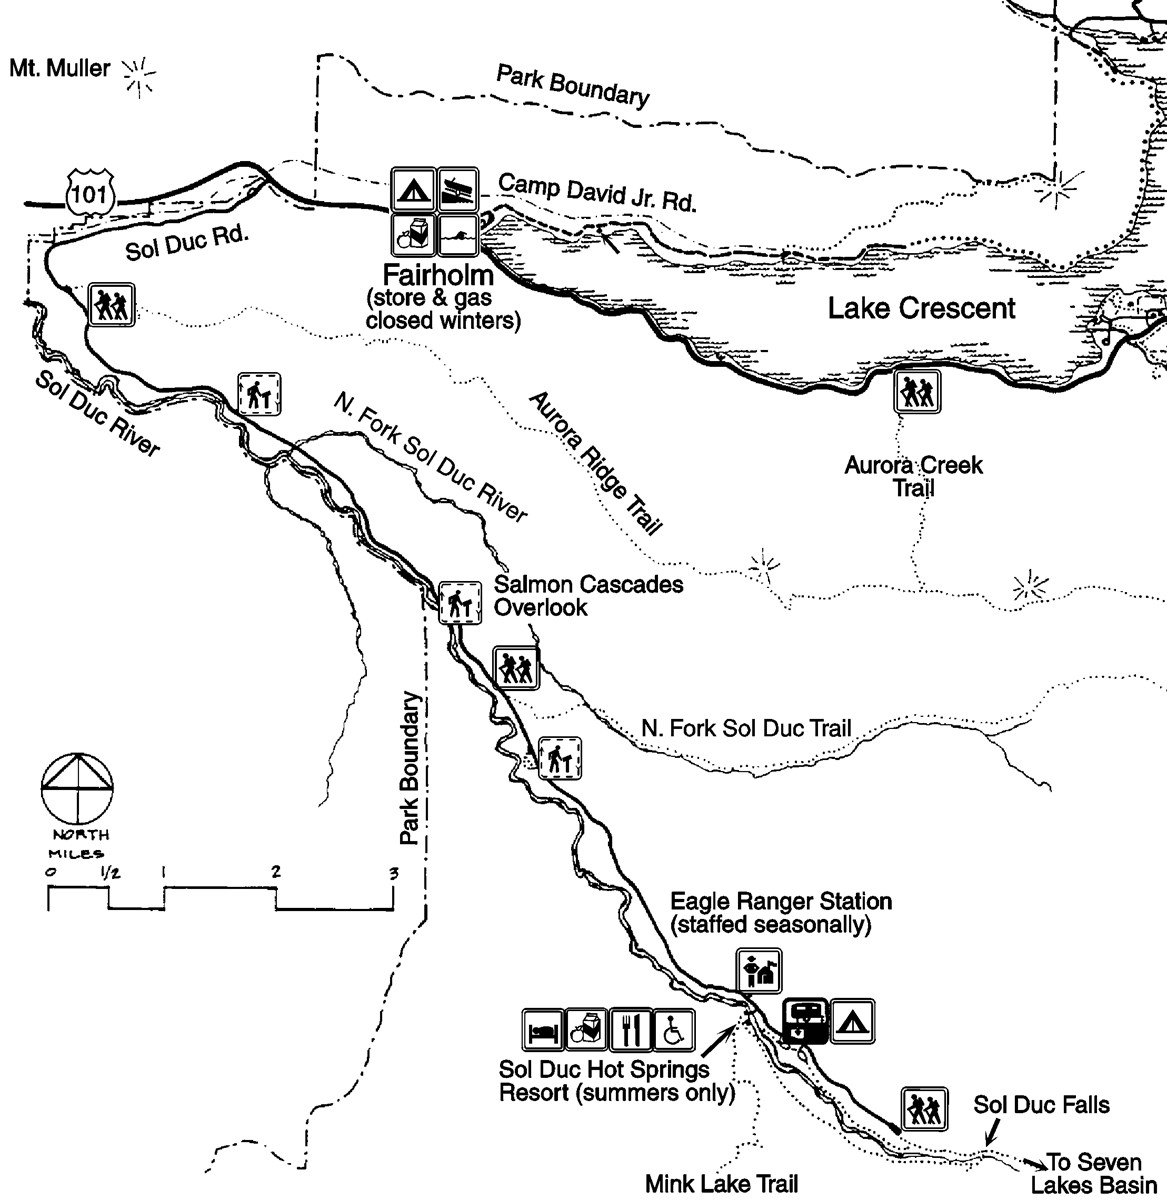 A map of the Sol Duc area including roads, the Sol Duc River, hiking trails, Eagle Ranger Station, Lake Crescent, camping areas, and the Sol Duc Hot Springs Resort